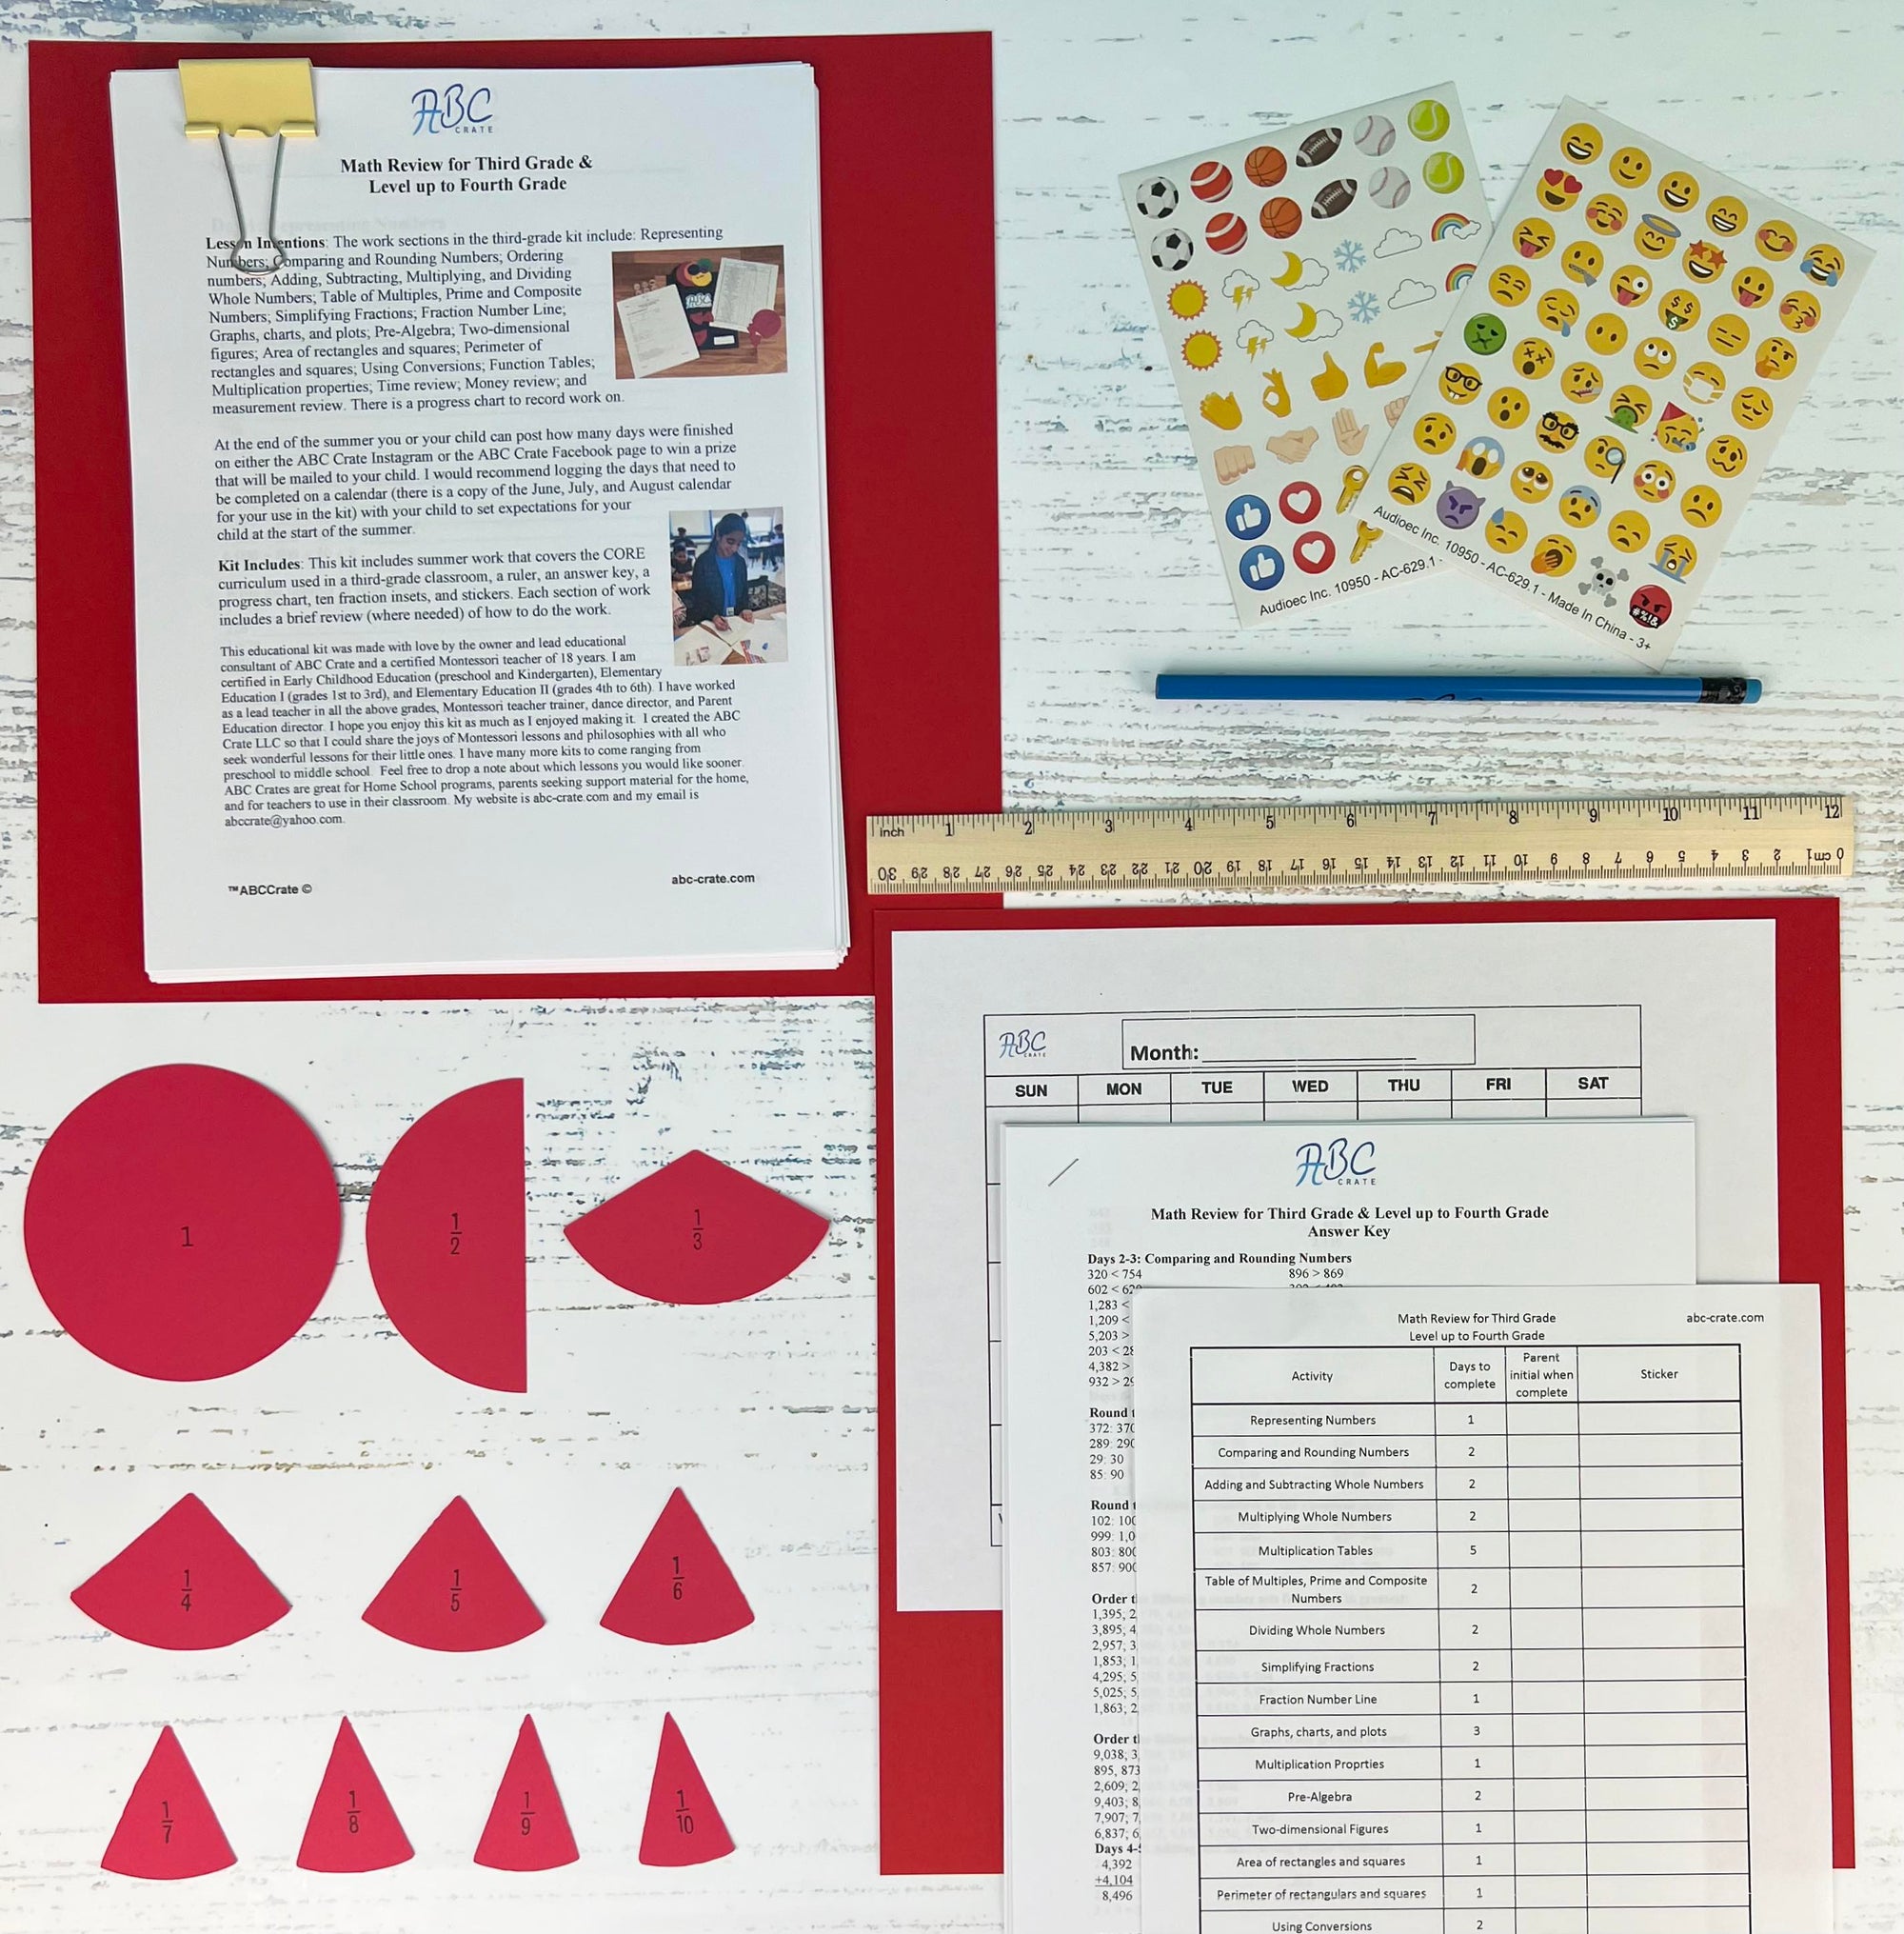 Third Grade Math Packet and Level Up to Fourth Grade Kit